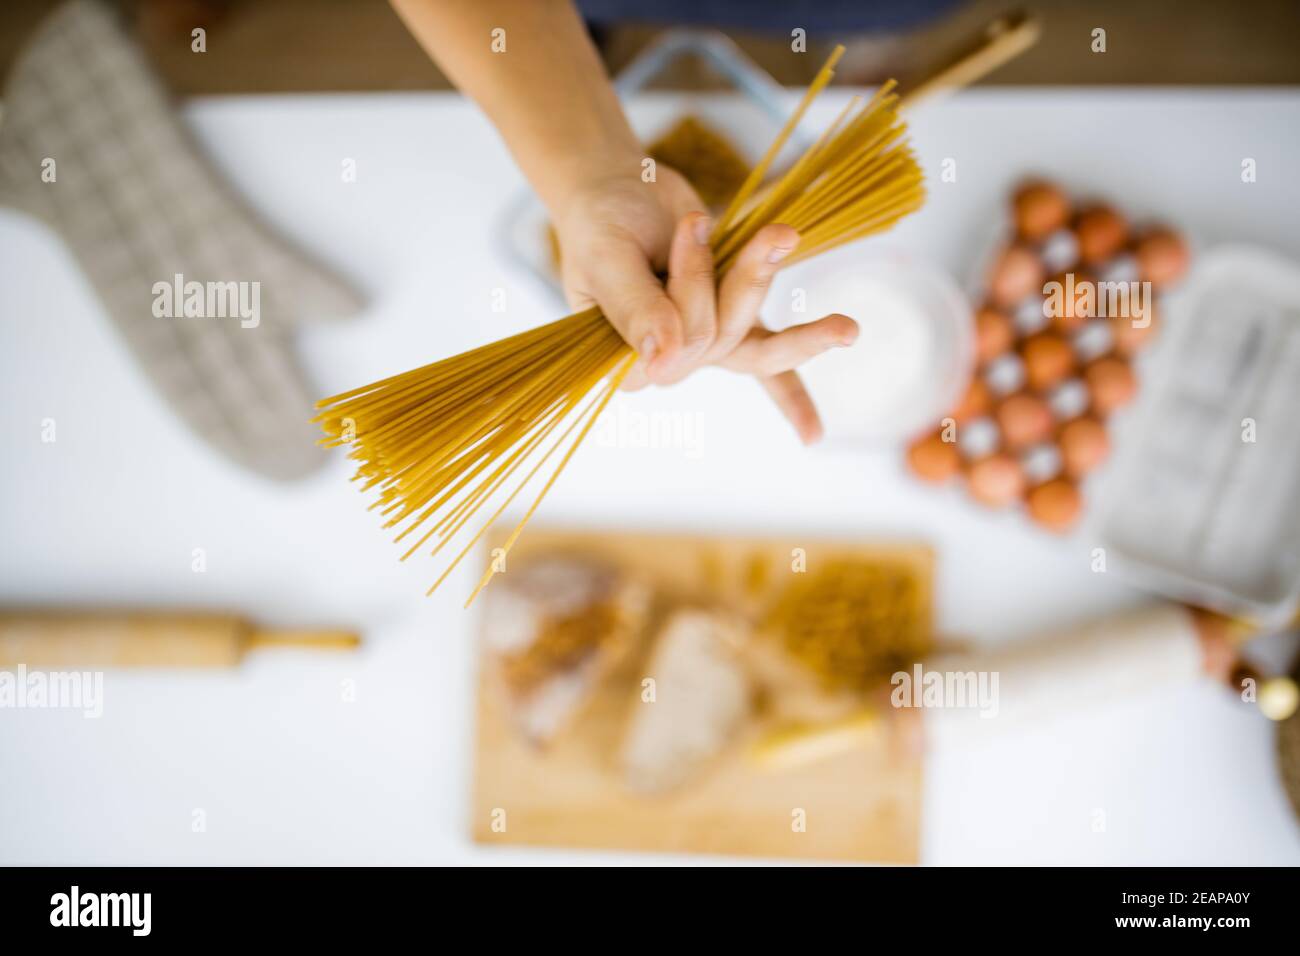 Female hand holding uncooked spaghetti above ingredients on a table Stock Photo